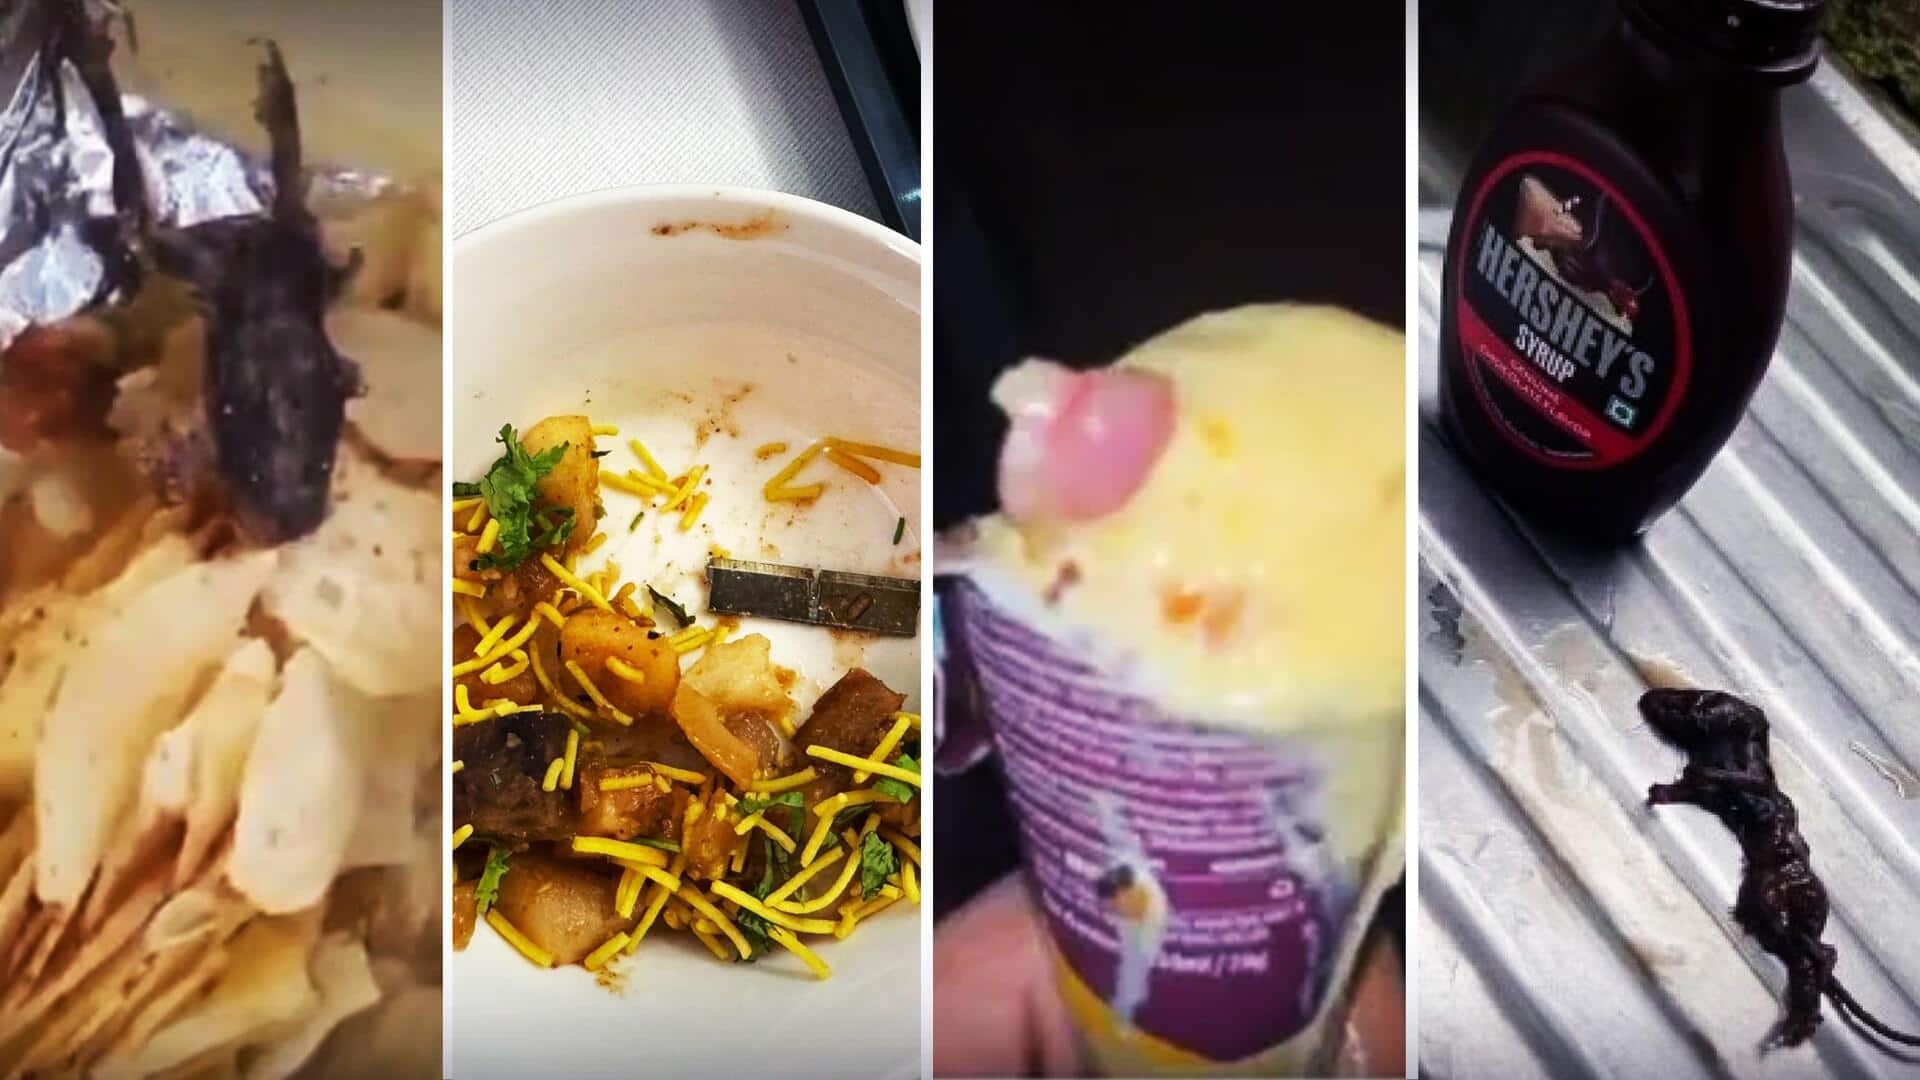 Unusual items found in recent food, online deliveries in India